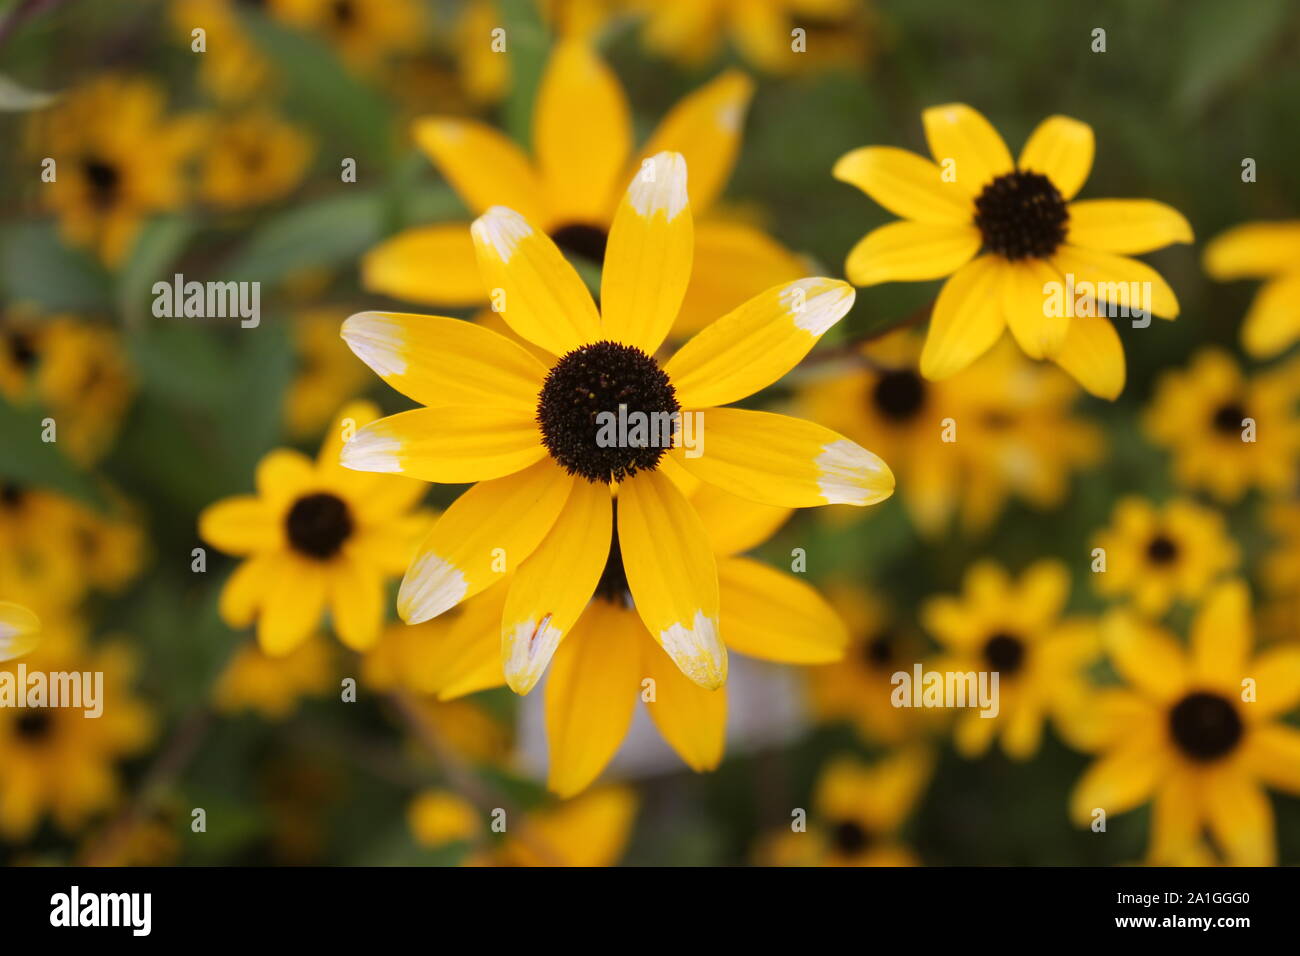 Yellow sun hat, Echinacea, medical plant for stabilizing immune system. Group of flowers. Focus in the center. Stock Photo